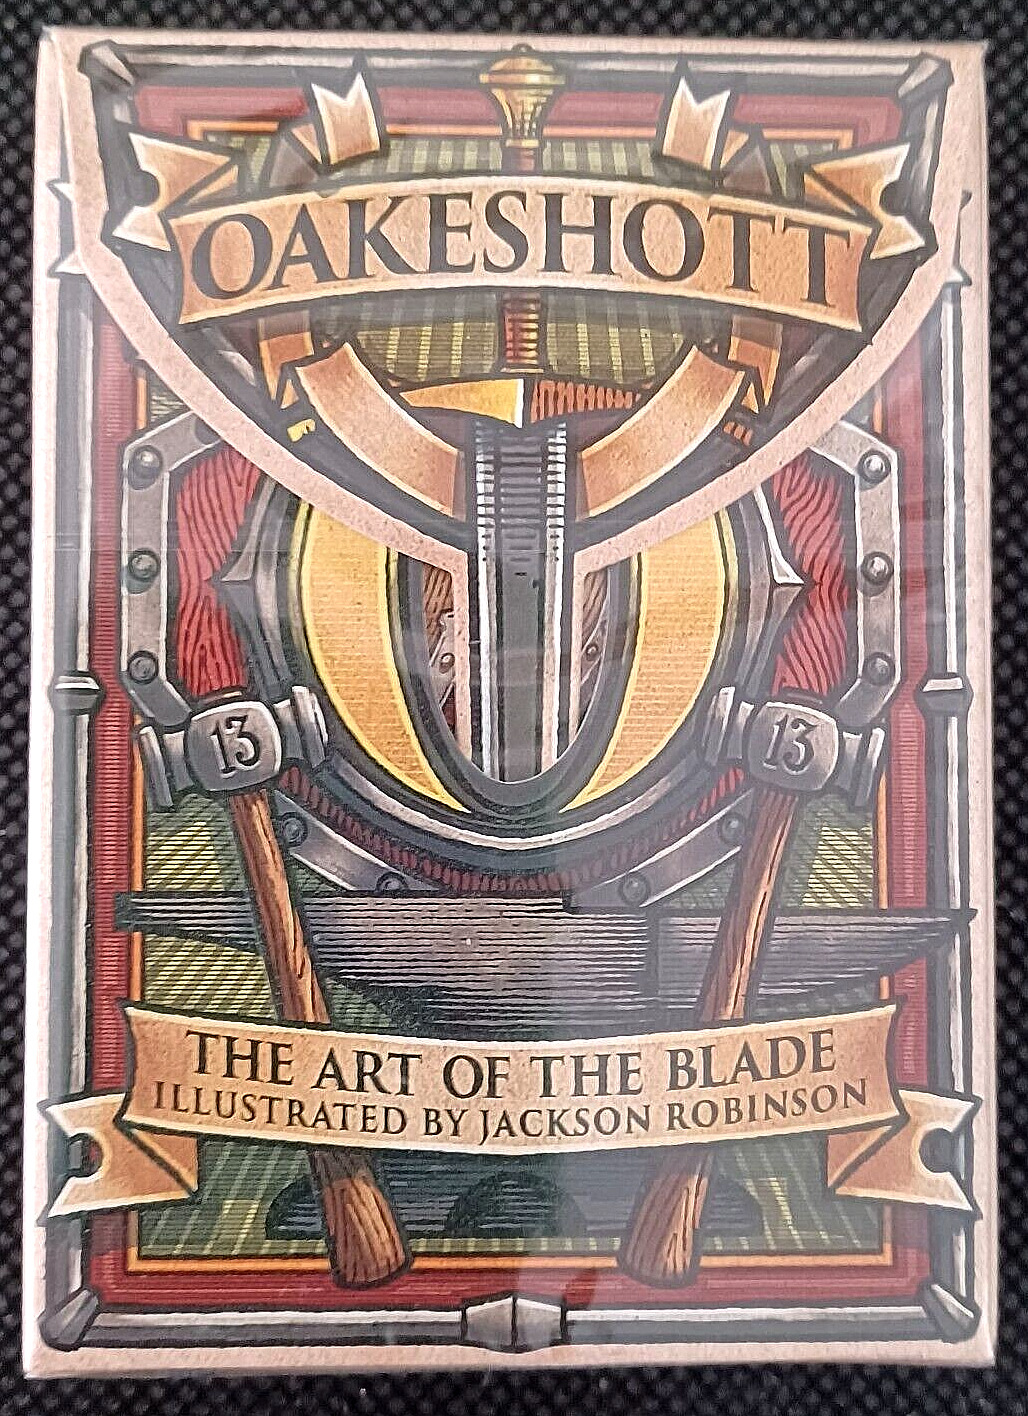 KINGS WILD PROJECT SHORTS   0akeshott  LIMITED EDITION playing cards ONLY 800